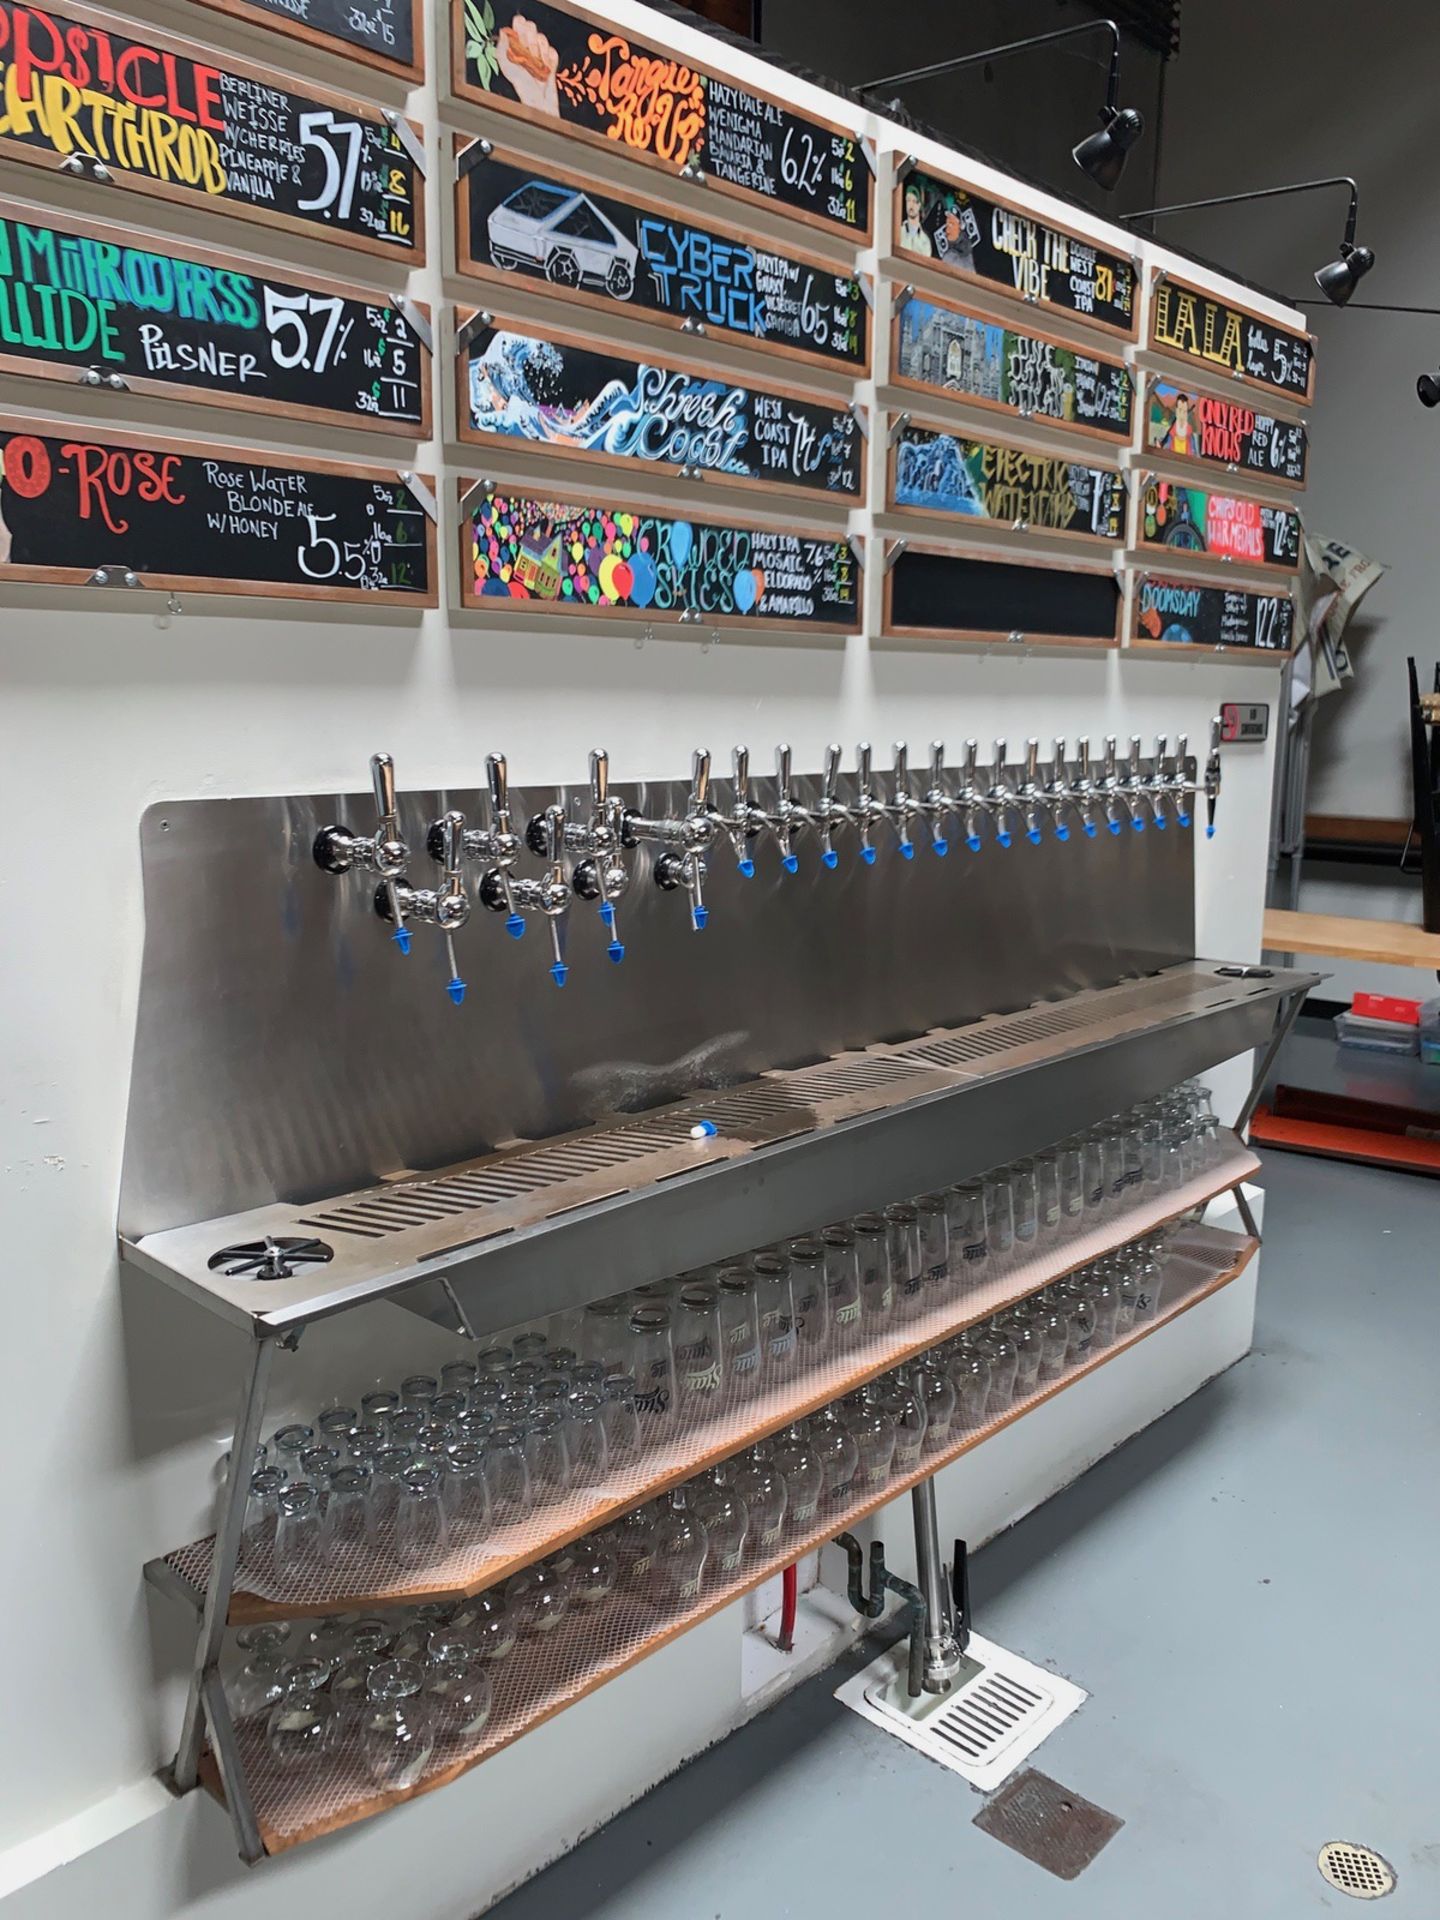 Micromatic 24-Tap Draft System with Fitttings, Regulators, and Draft | Subj to Bulk | Rig Fee: $200